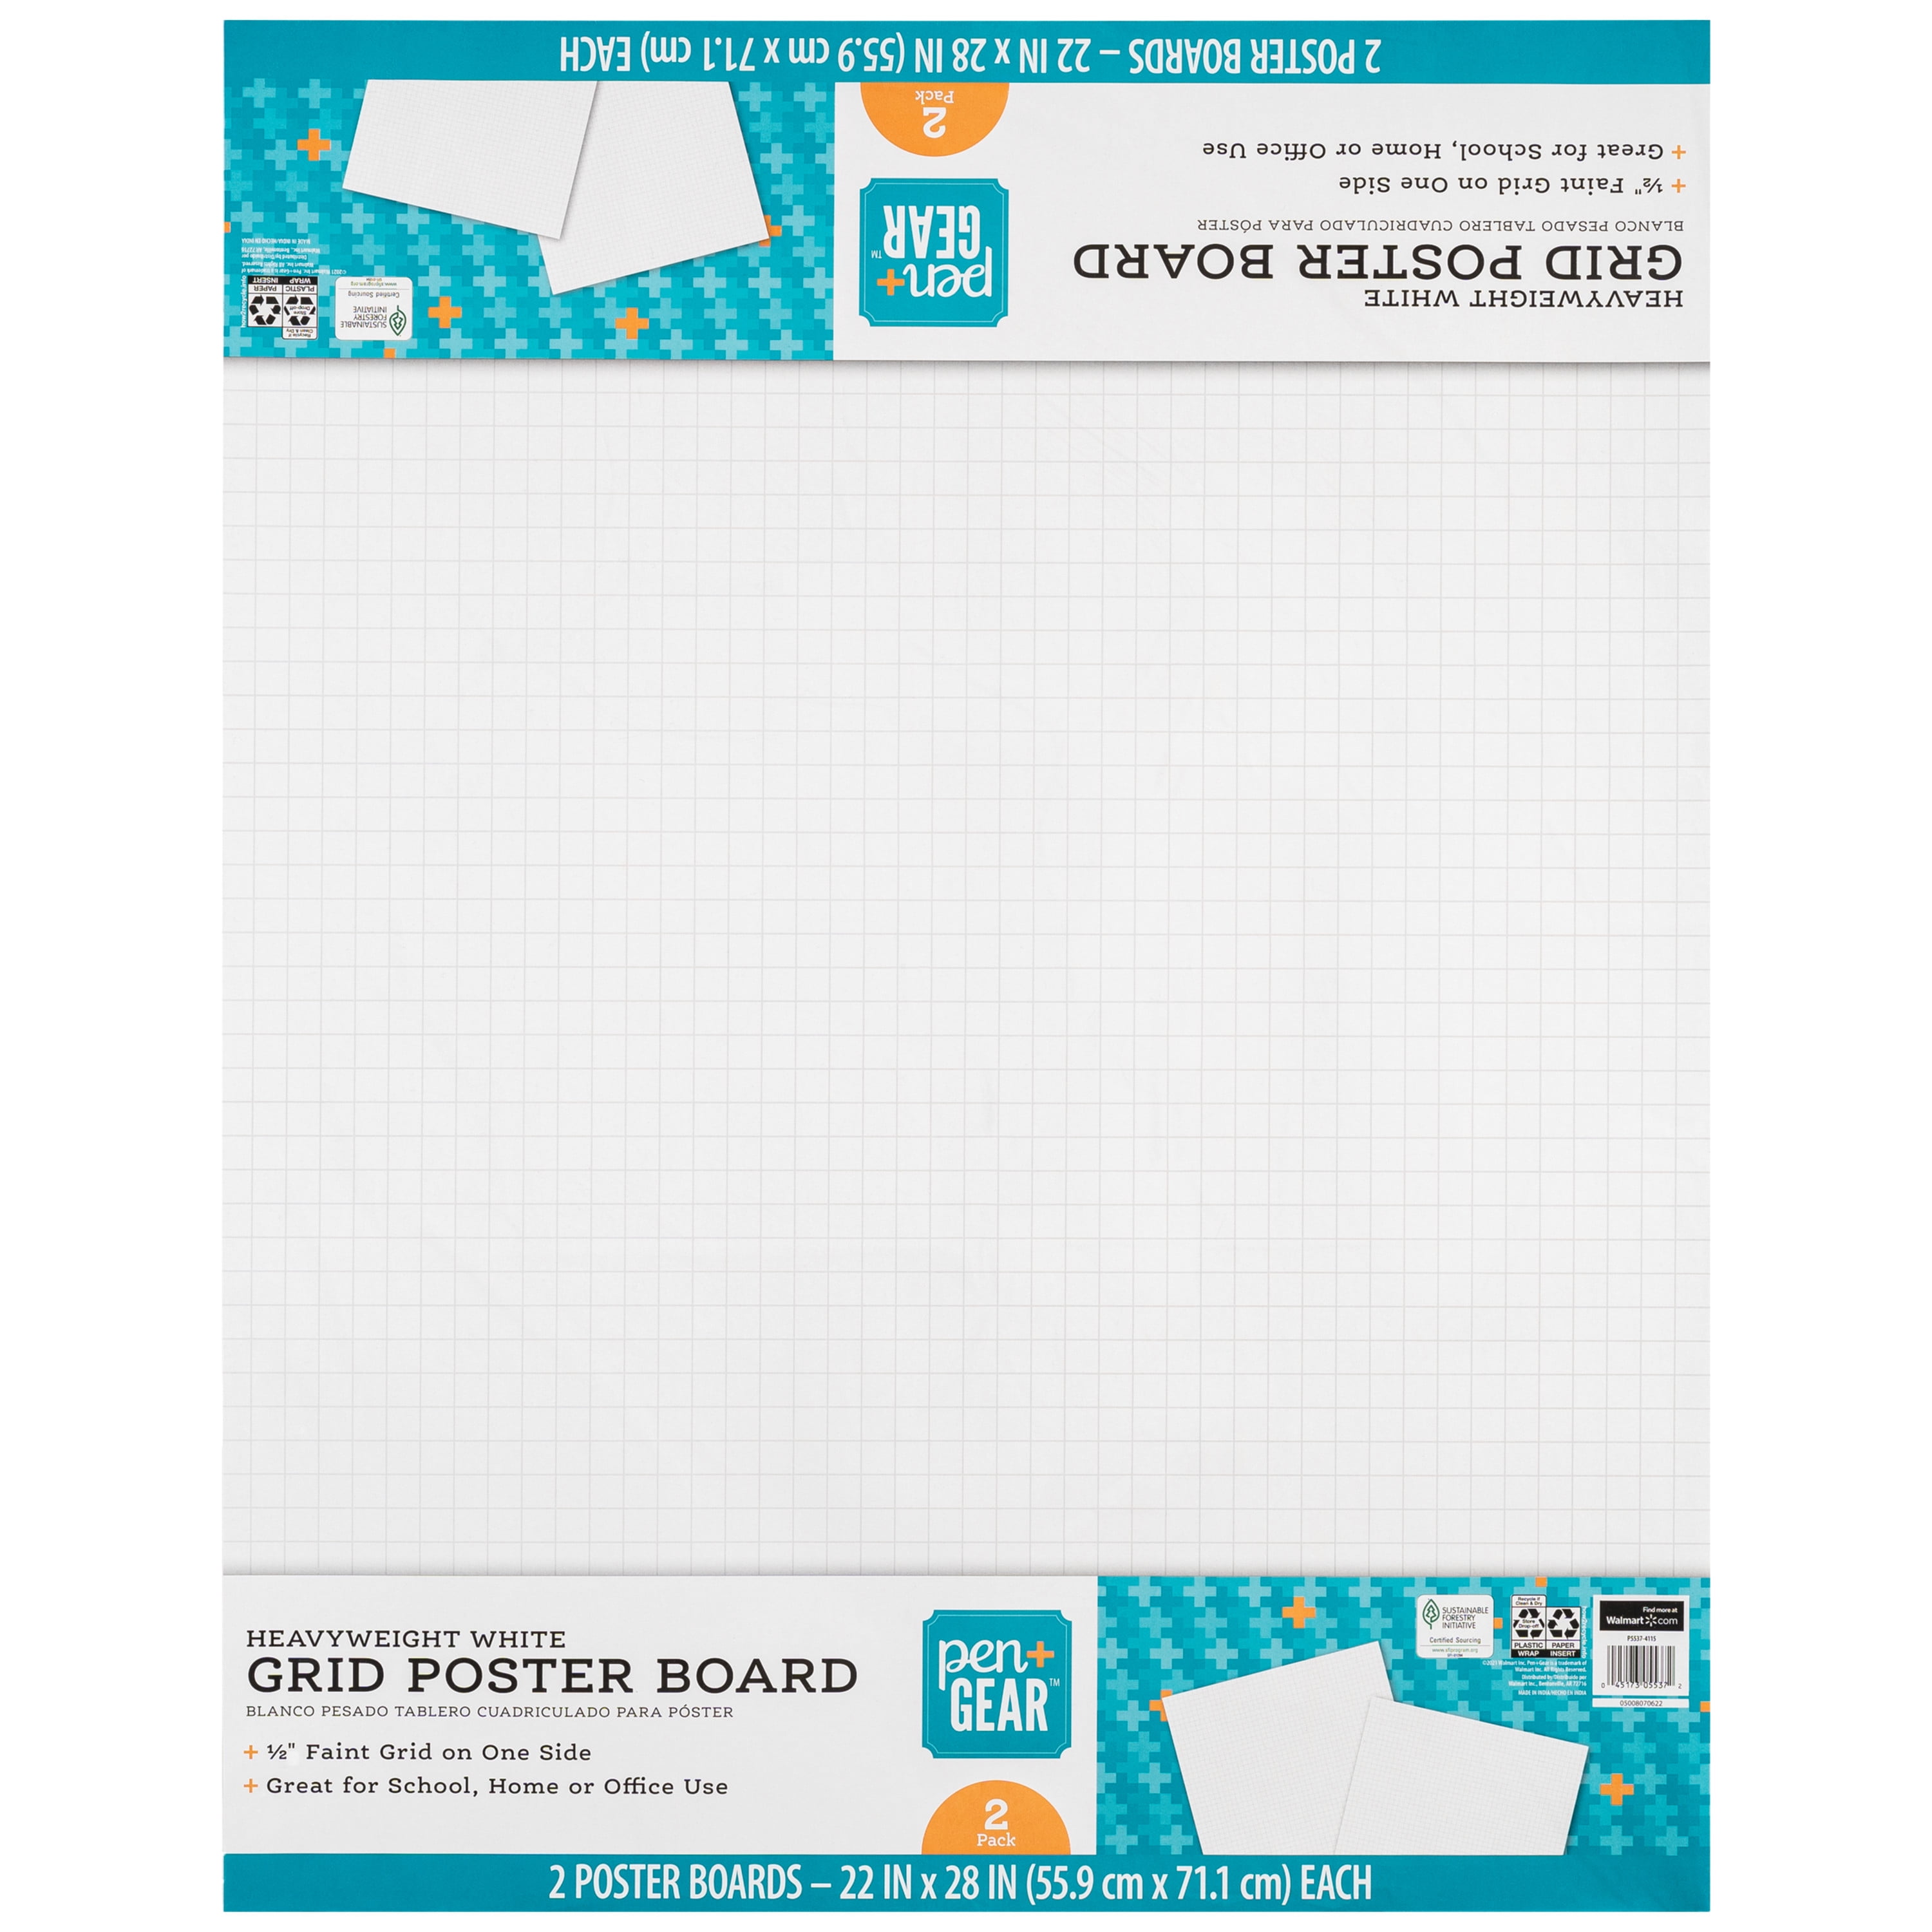 Pen+gear Premium Heavyweight Poster Board with Glitter Frame - White - 22 x 28 in